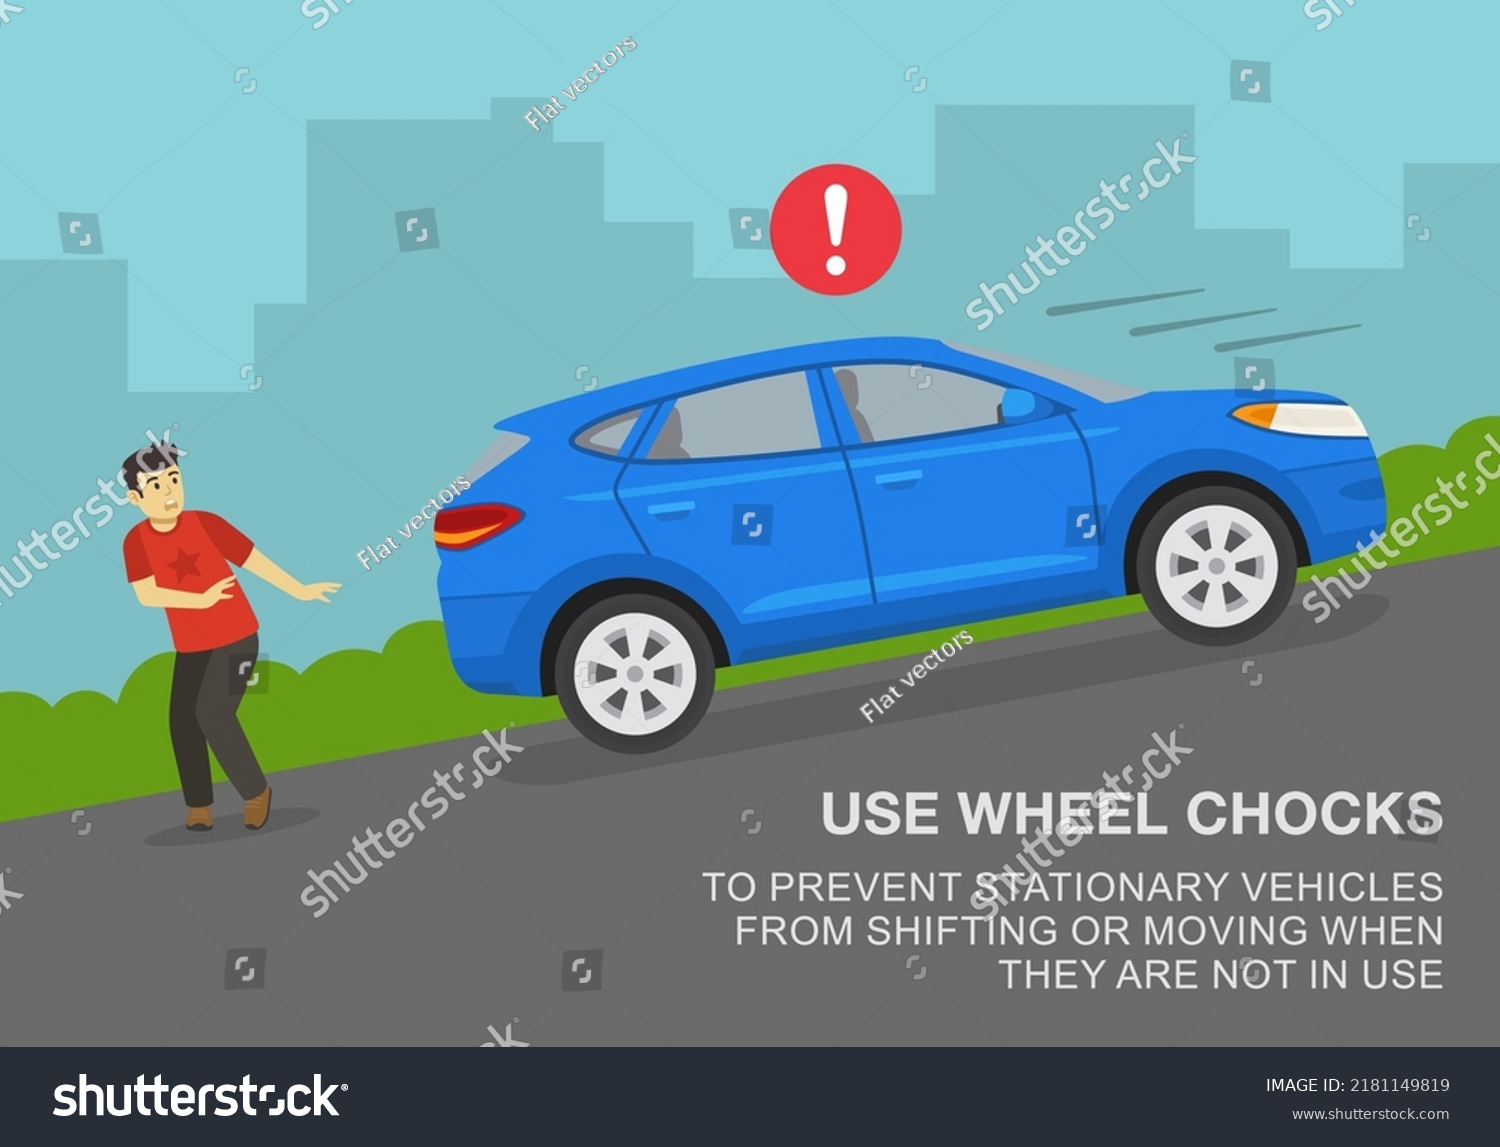 SVG of Safe driving rules and tips. Use wheel chocks to prevent vehicles from shifting or moving when they are no in use. Male character scared of suv rolling back. Flat vector illustration. svg